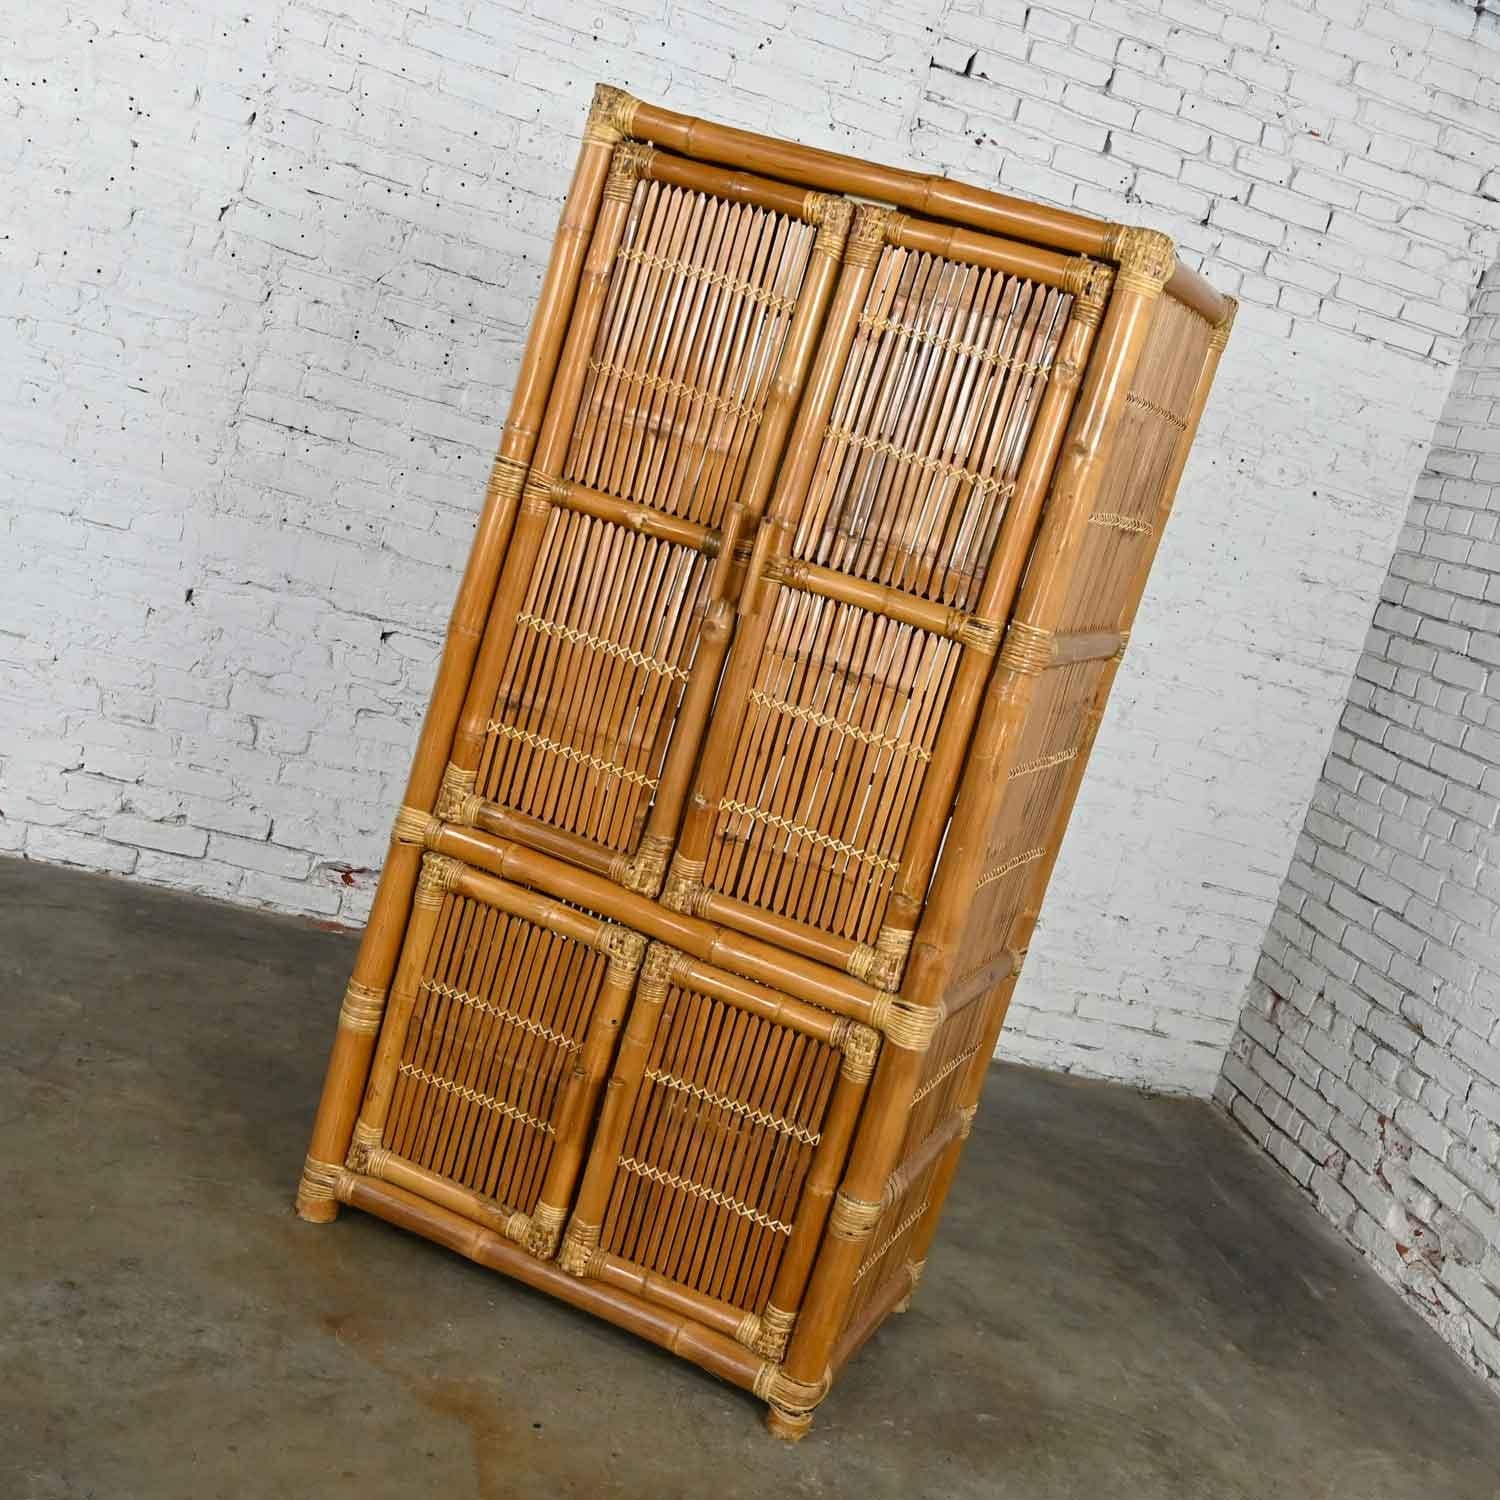 Gorgeous vintage organic modern or coastal style rattan and bamboo armoire or wardrobe style upright cabinet. Beautiful condition: however, it is vintage and not new so will have signs of use although minimal. Please see photos. Circa Late 20th